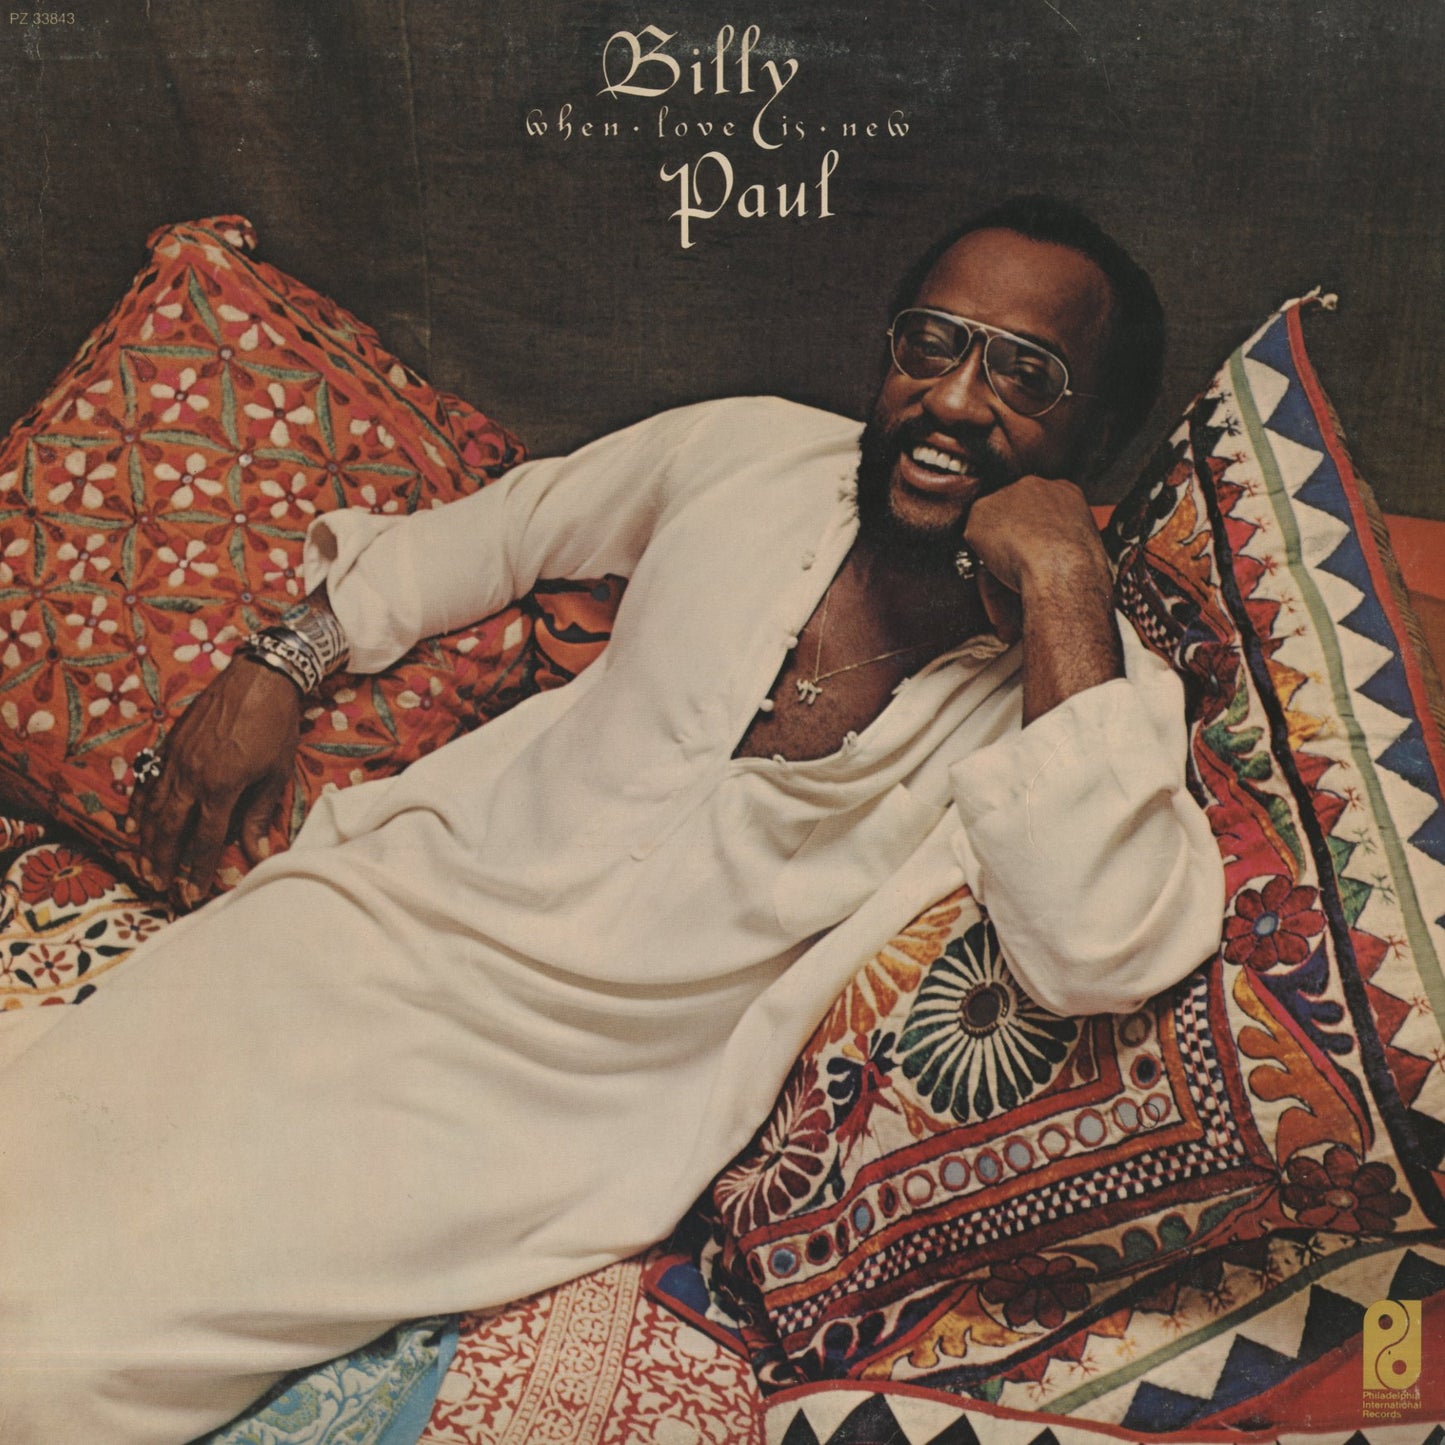 Billy Paul / ビリー・ポール / When Love Is New (PZ33843)